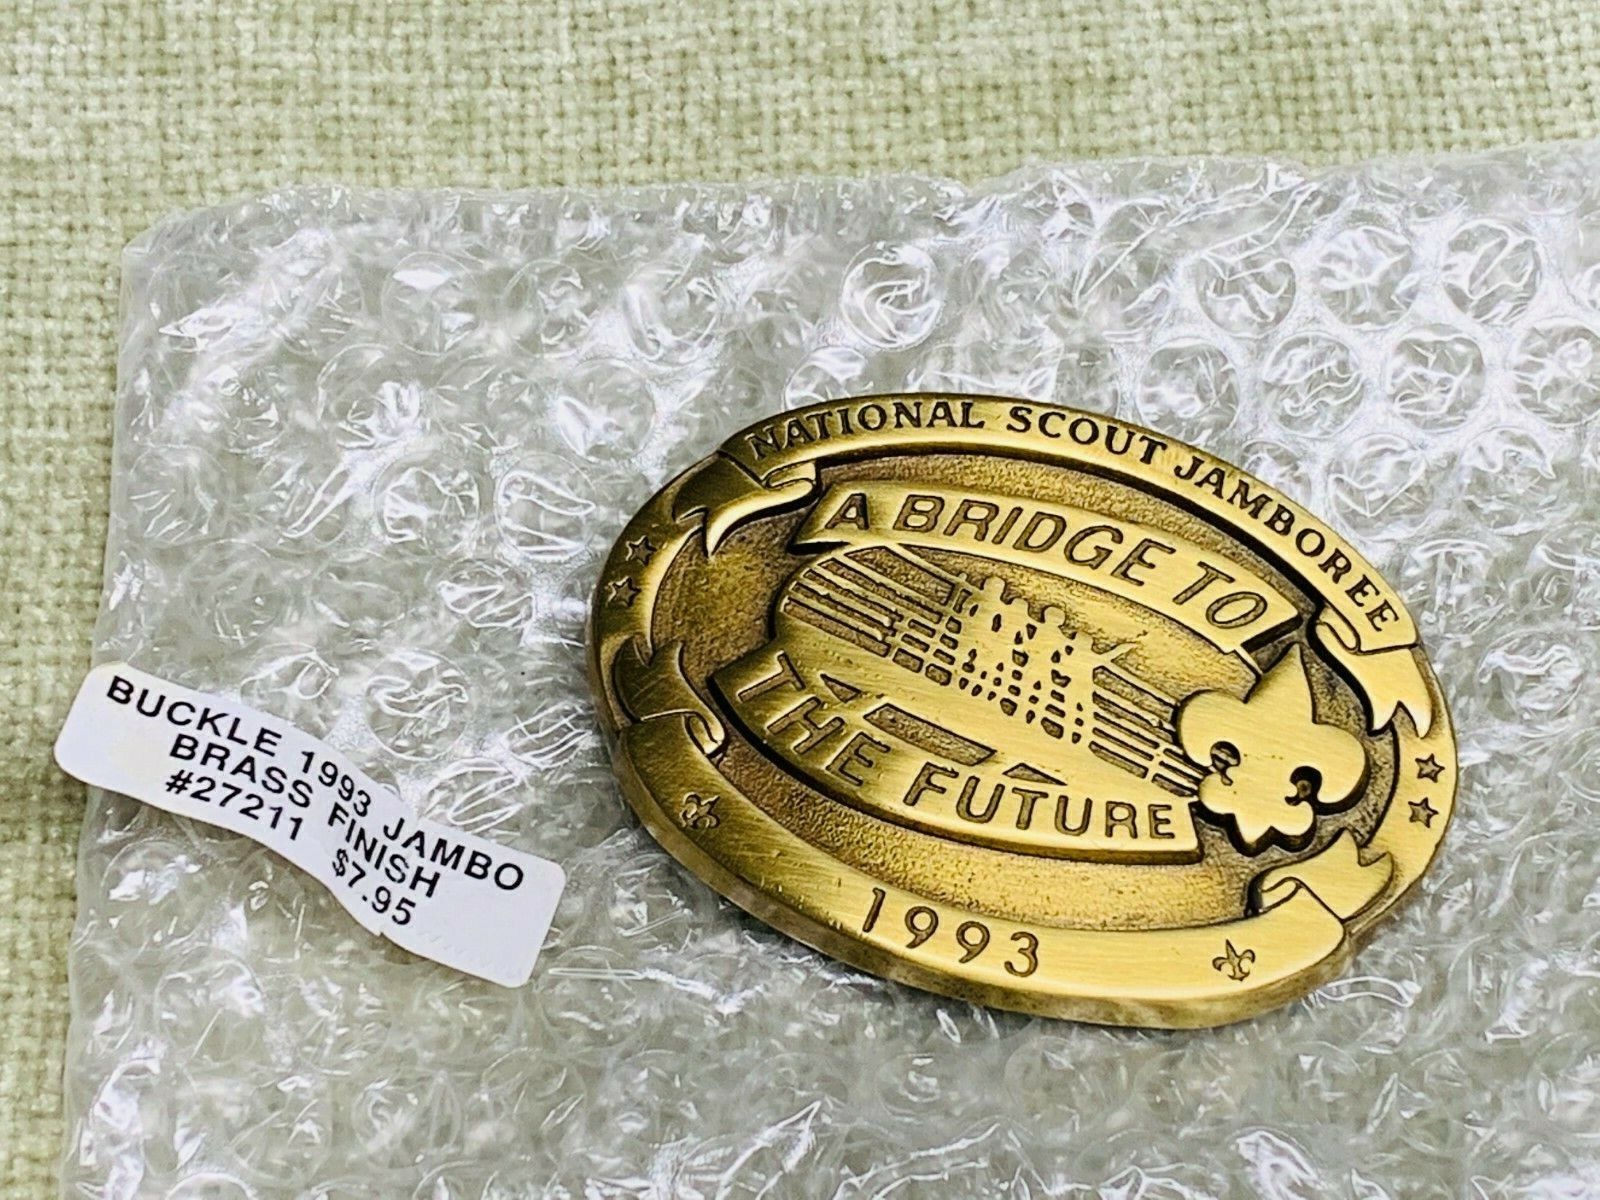 Boy Scout Brass Finished Buckle 1993 Jamboree A Bridge to the Future Never Used